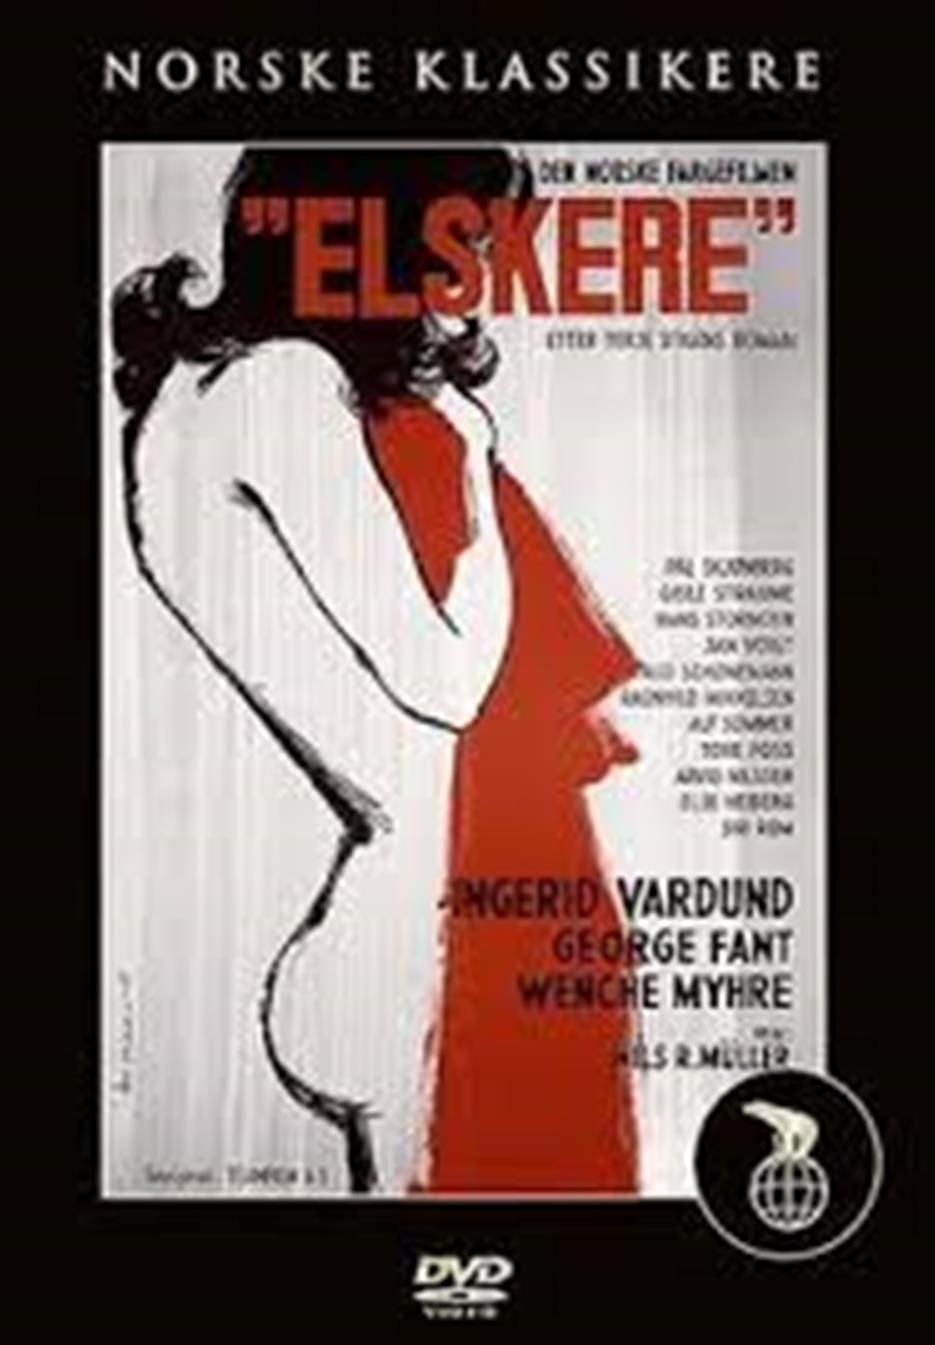 Elskere (1963) with English Subtitles on DVD on DVD